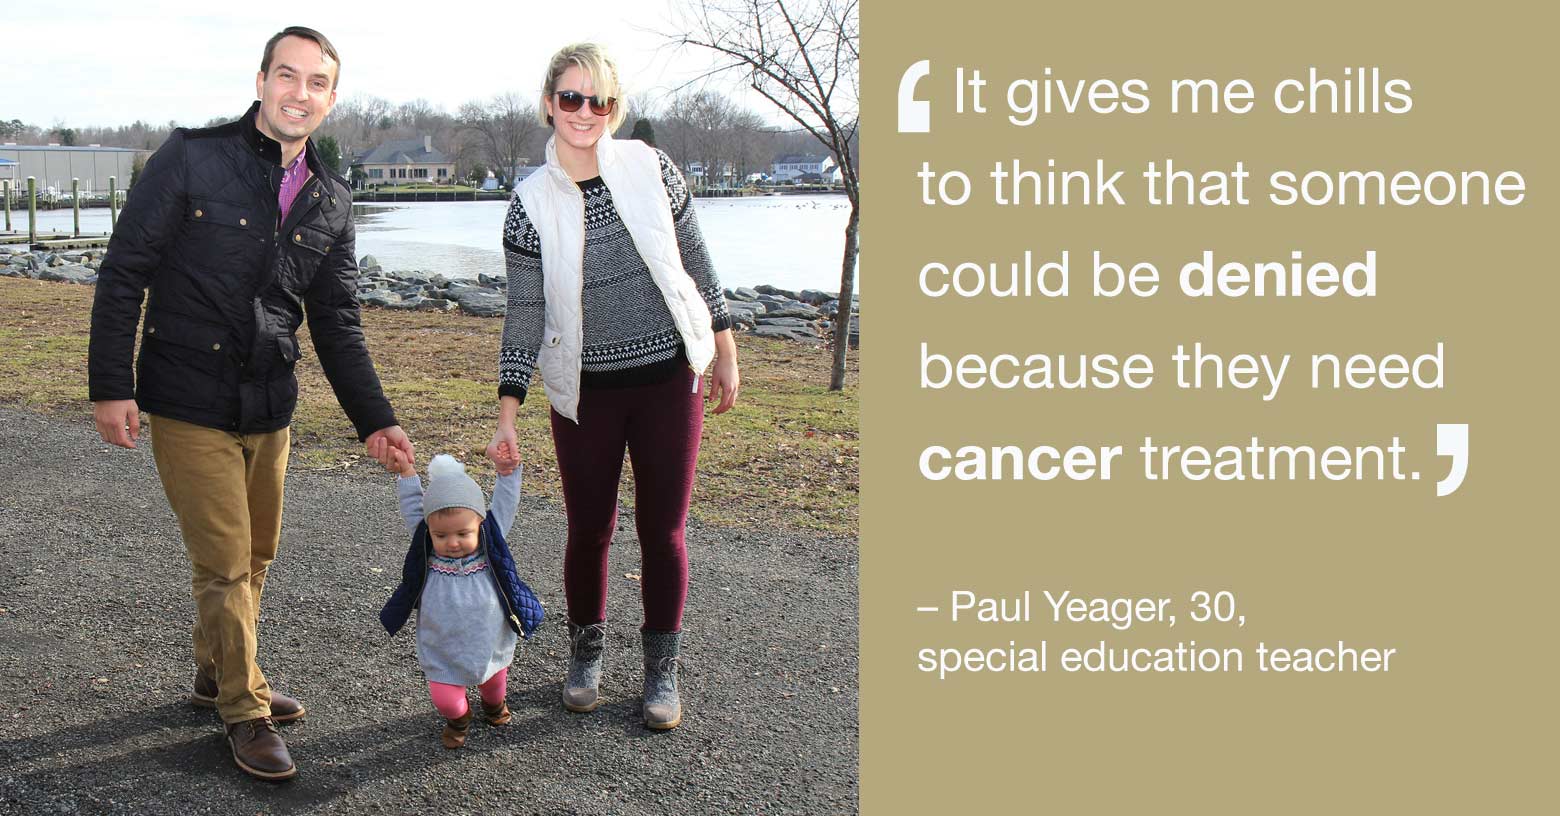 No one should be denied coverage for a cancer treatment.